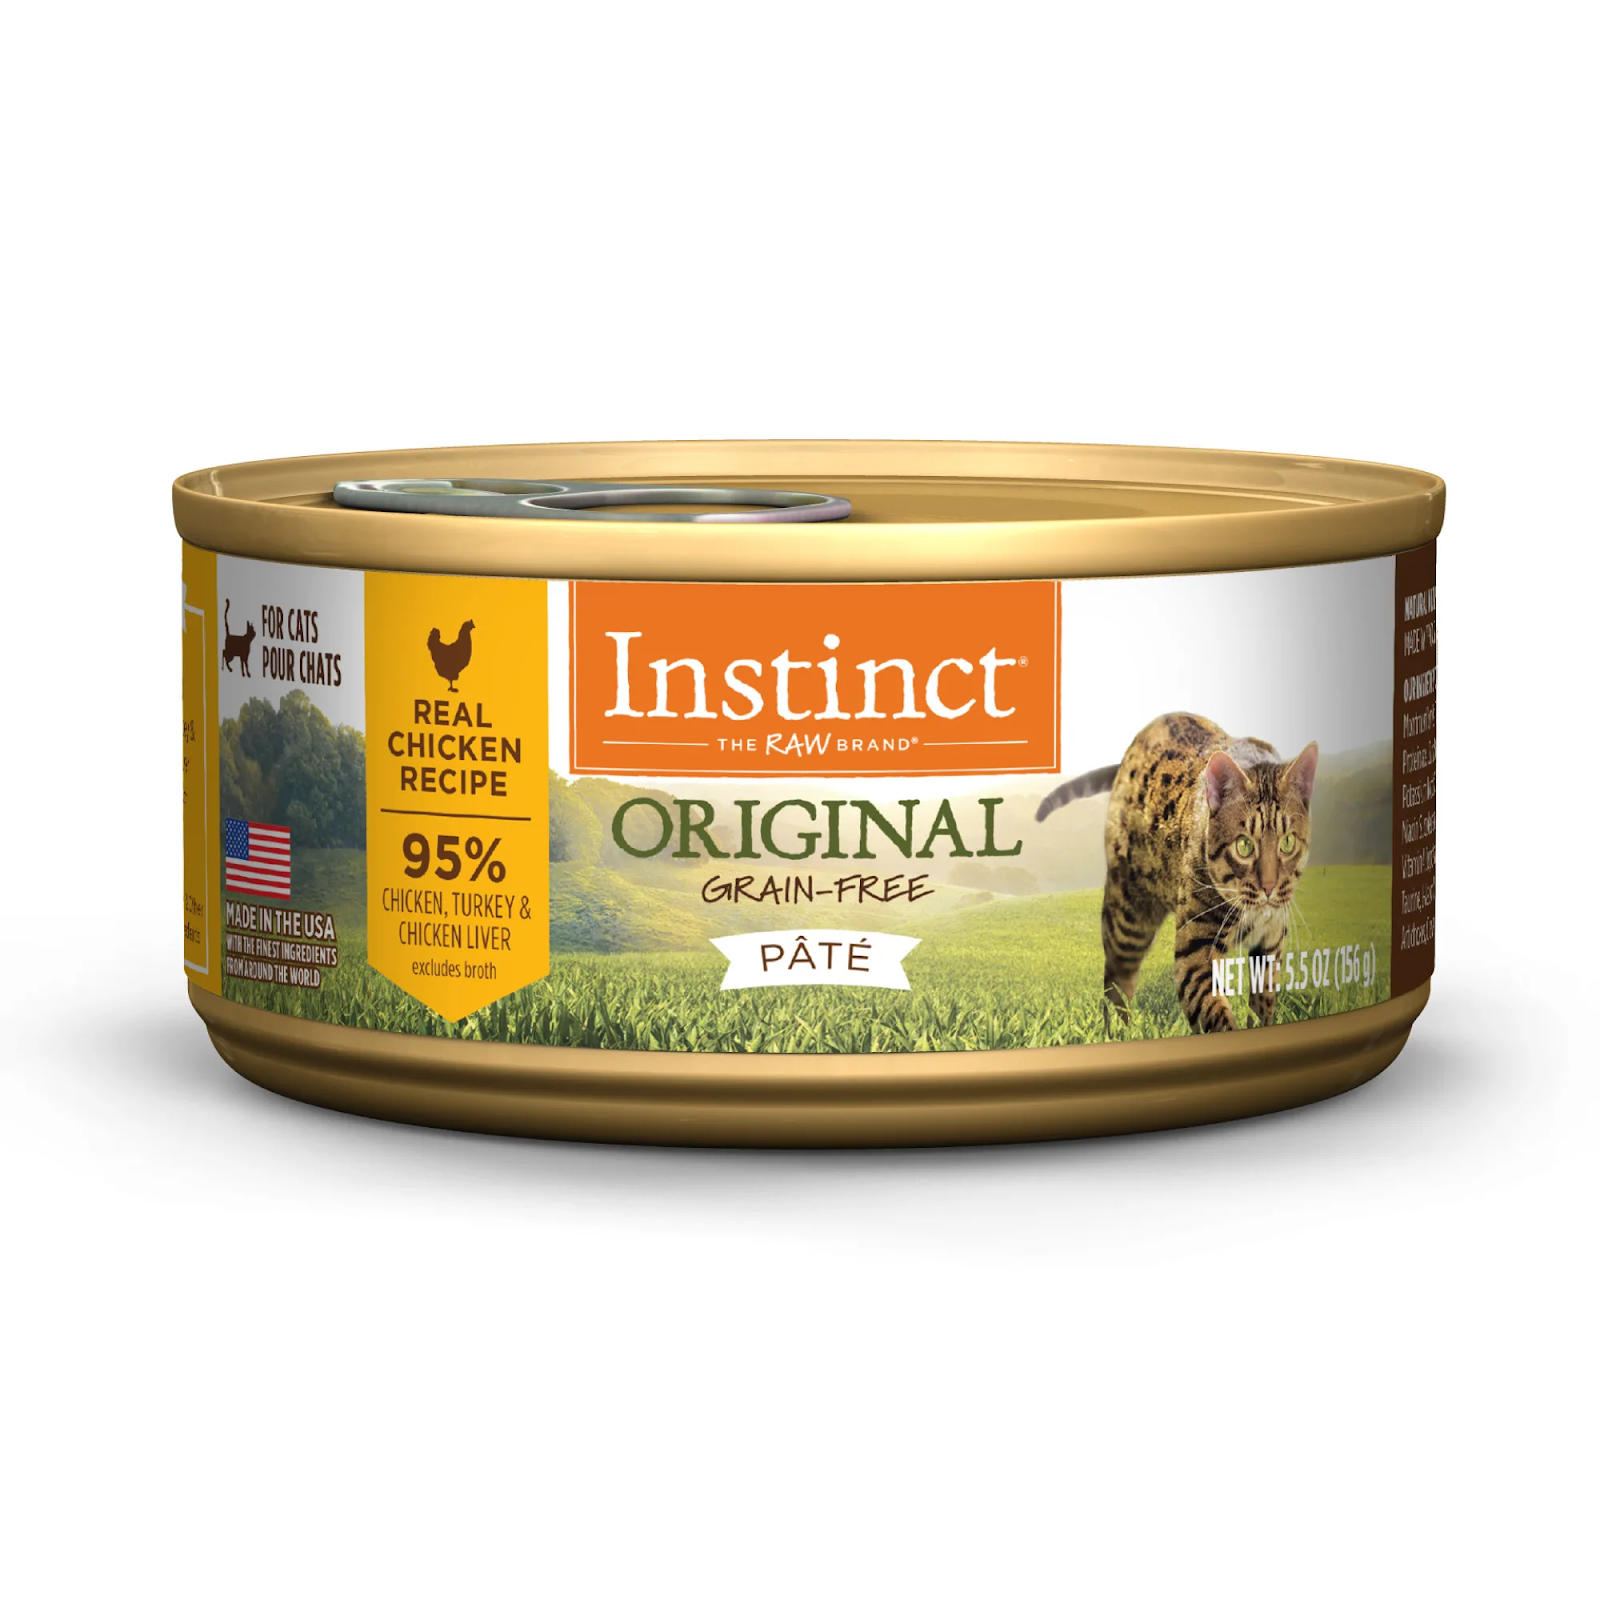 what-cat-foods-are-made-in-the-usa-cat-health